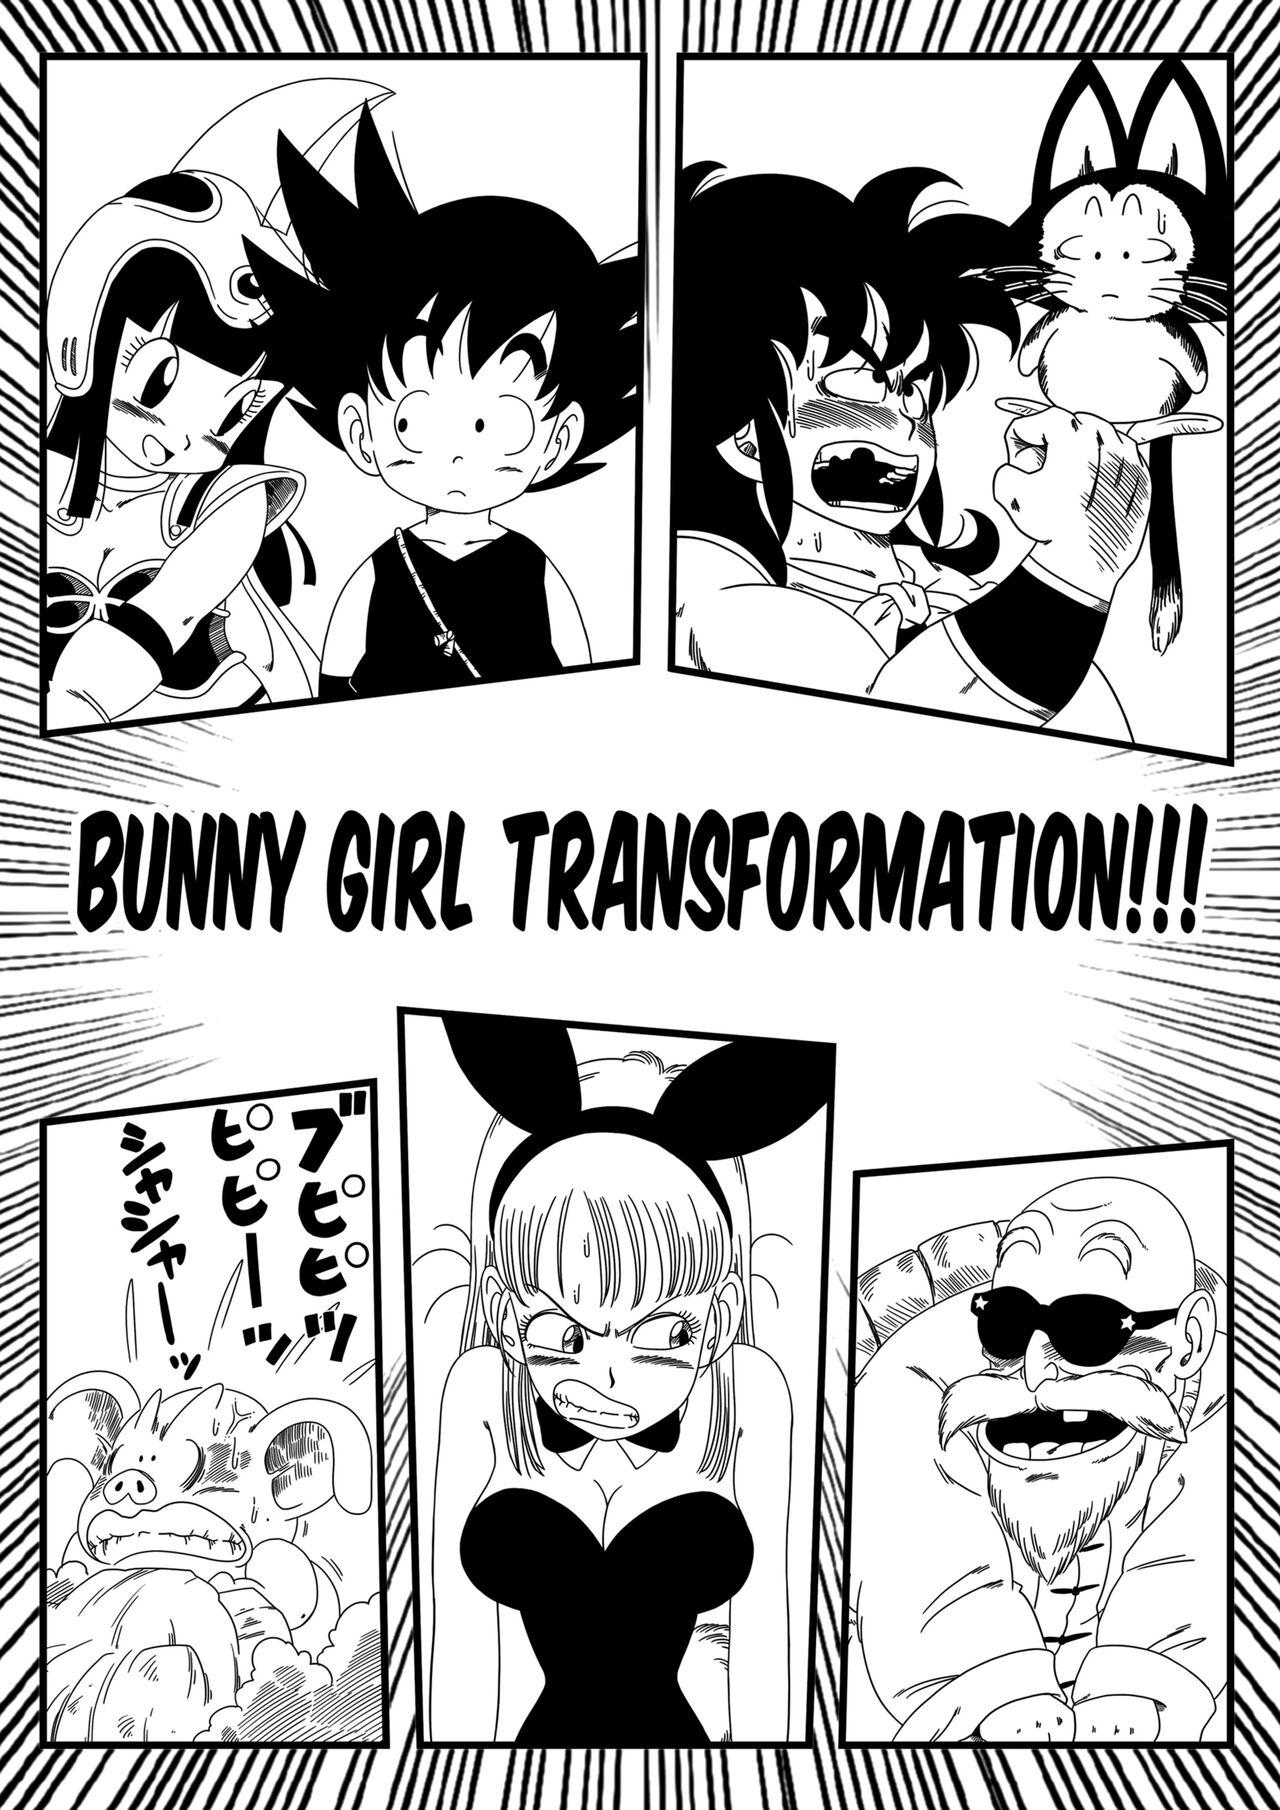 Young Bunny Girl Transformation Pussyeating - Page 3